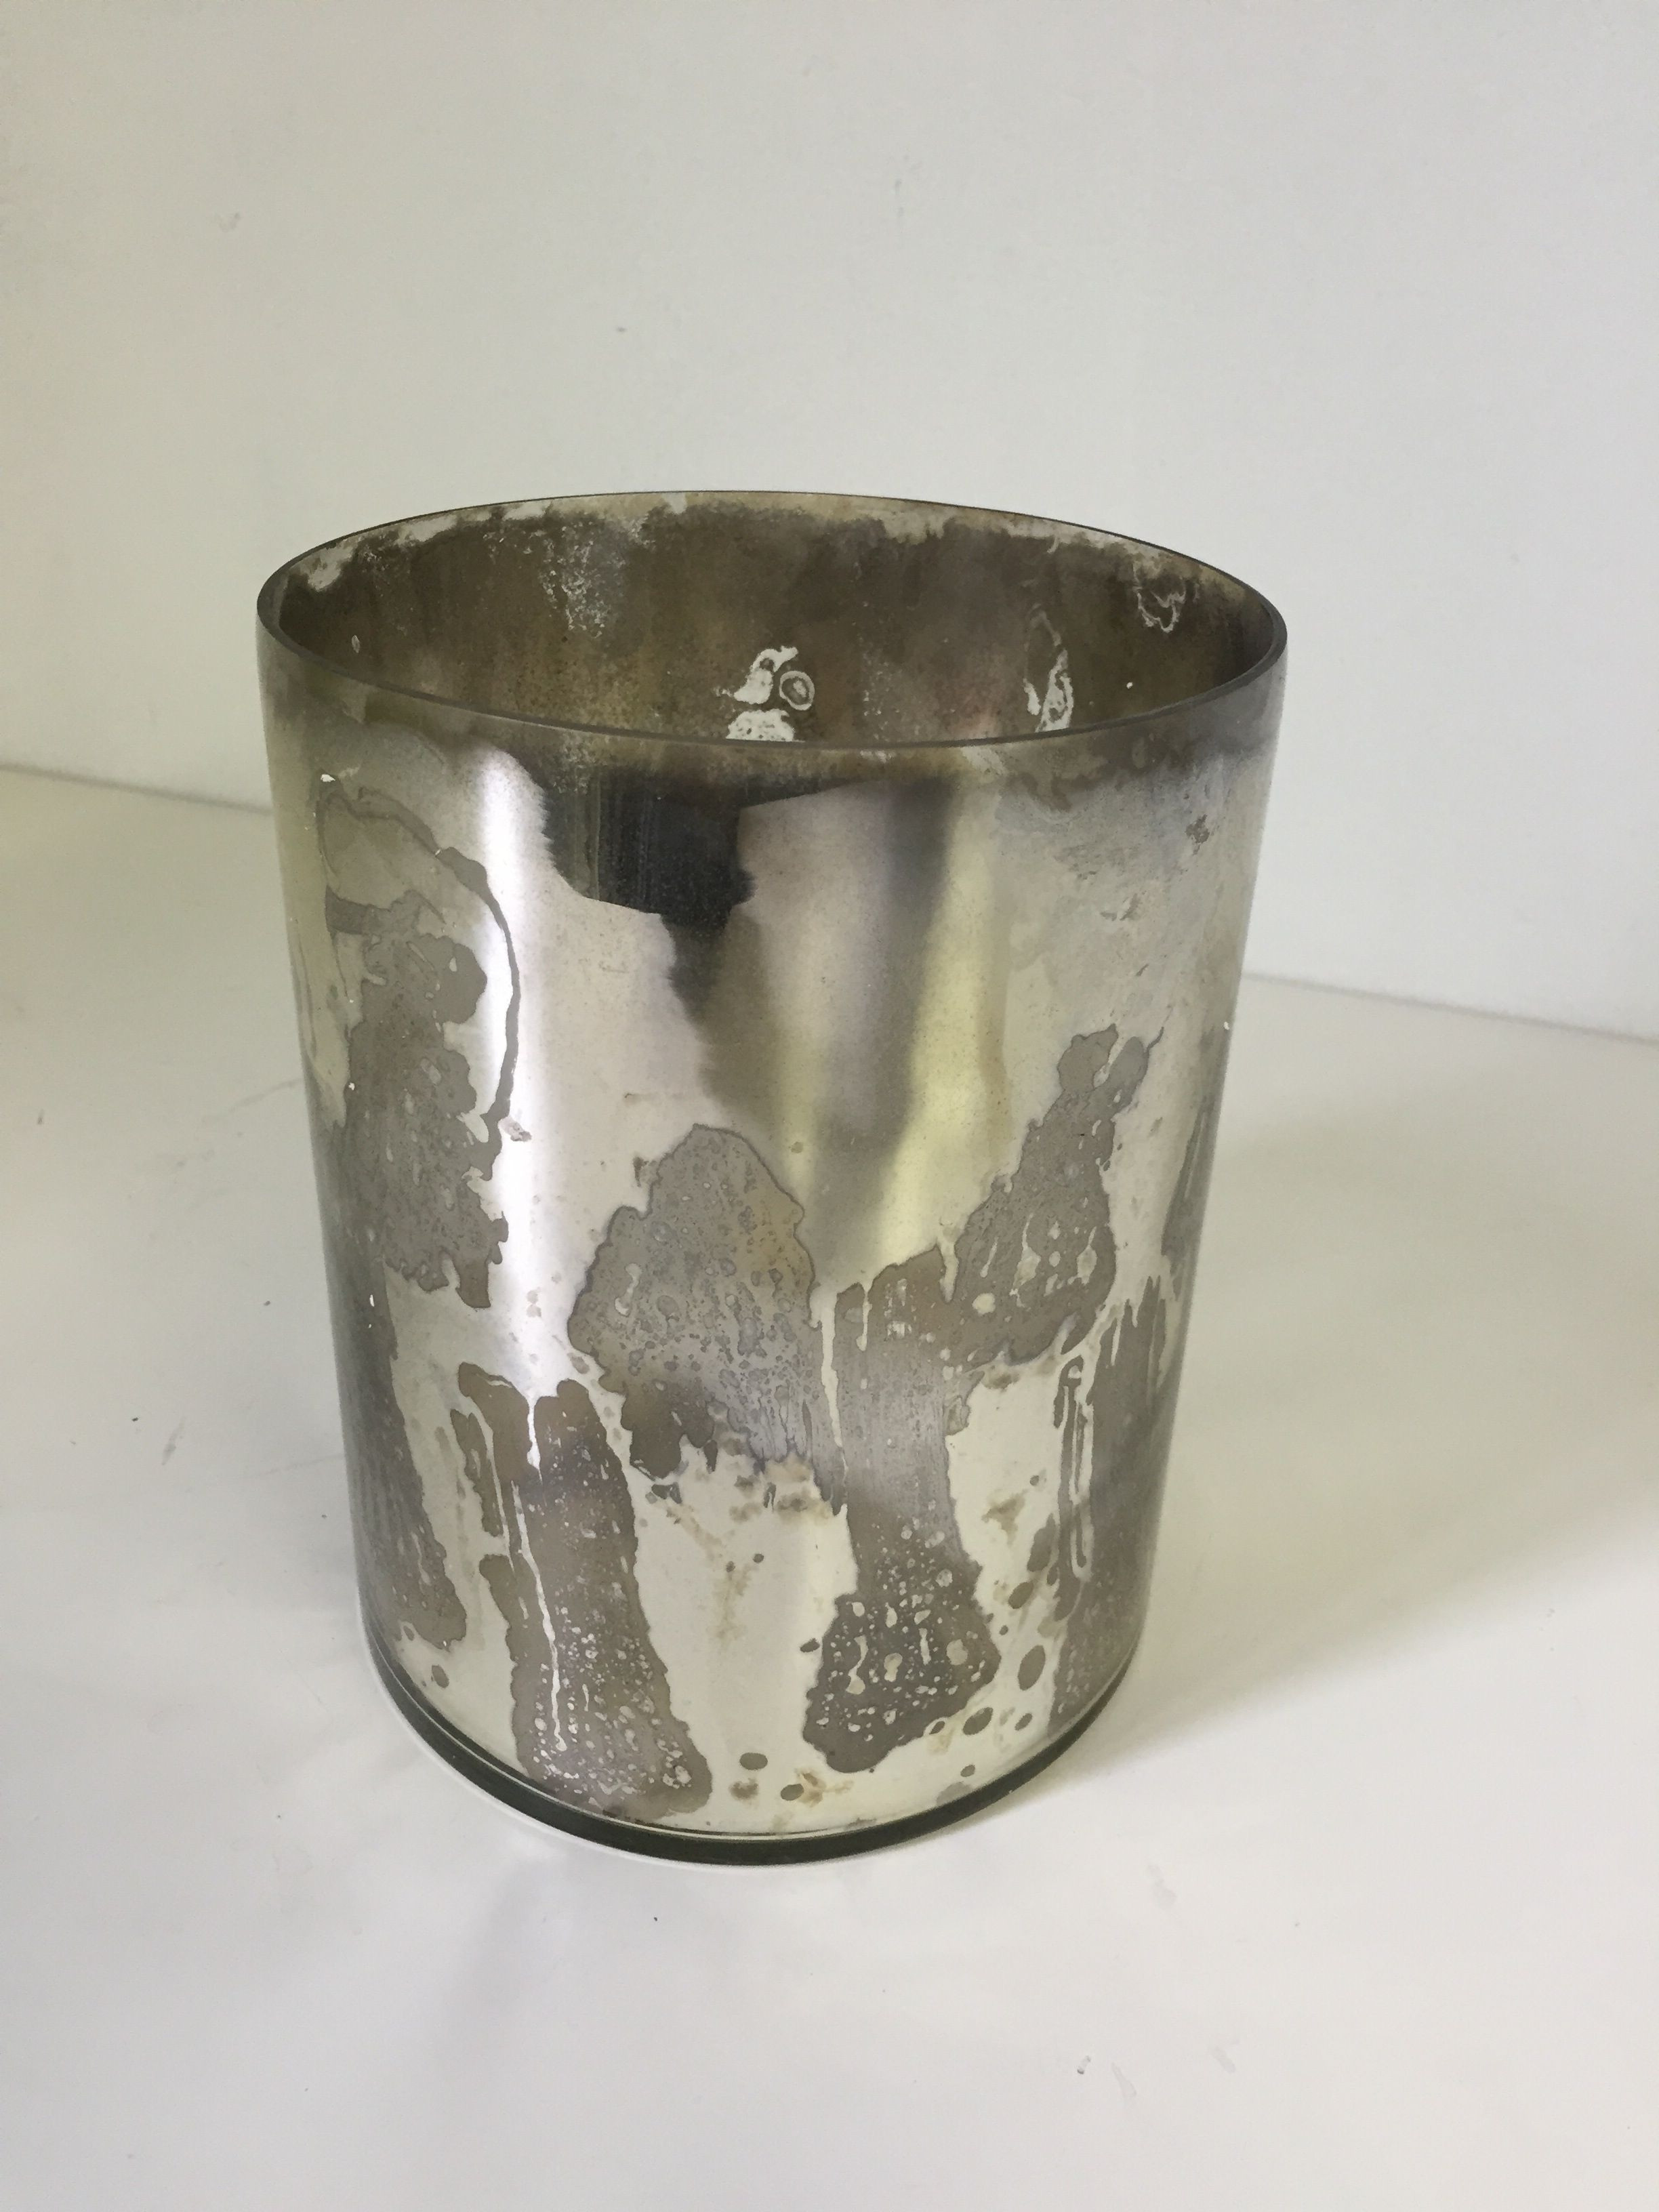 20 Recommended Mercury Glass Bud Vase 2024 free download mercury glass bud vase of silver mercury glass hurricanes vases 6x7 11 pieces total pertaining to silver mercury glass hurricanes vases 6x7 11 pieces total hallway shelves